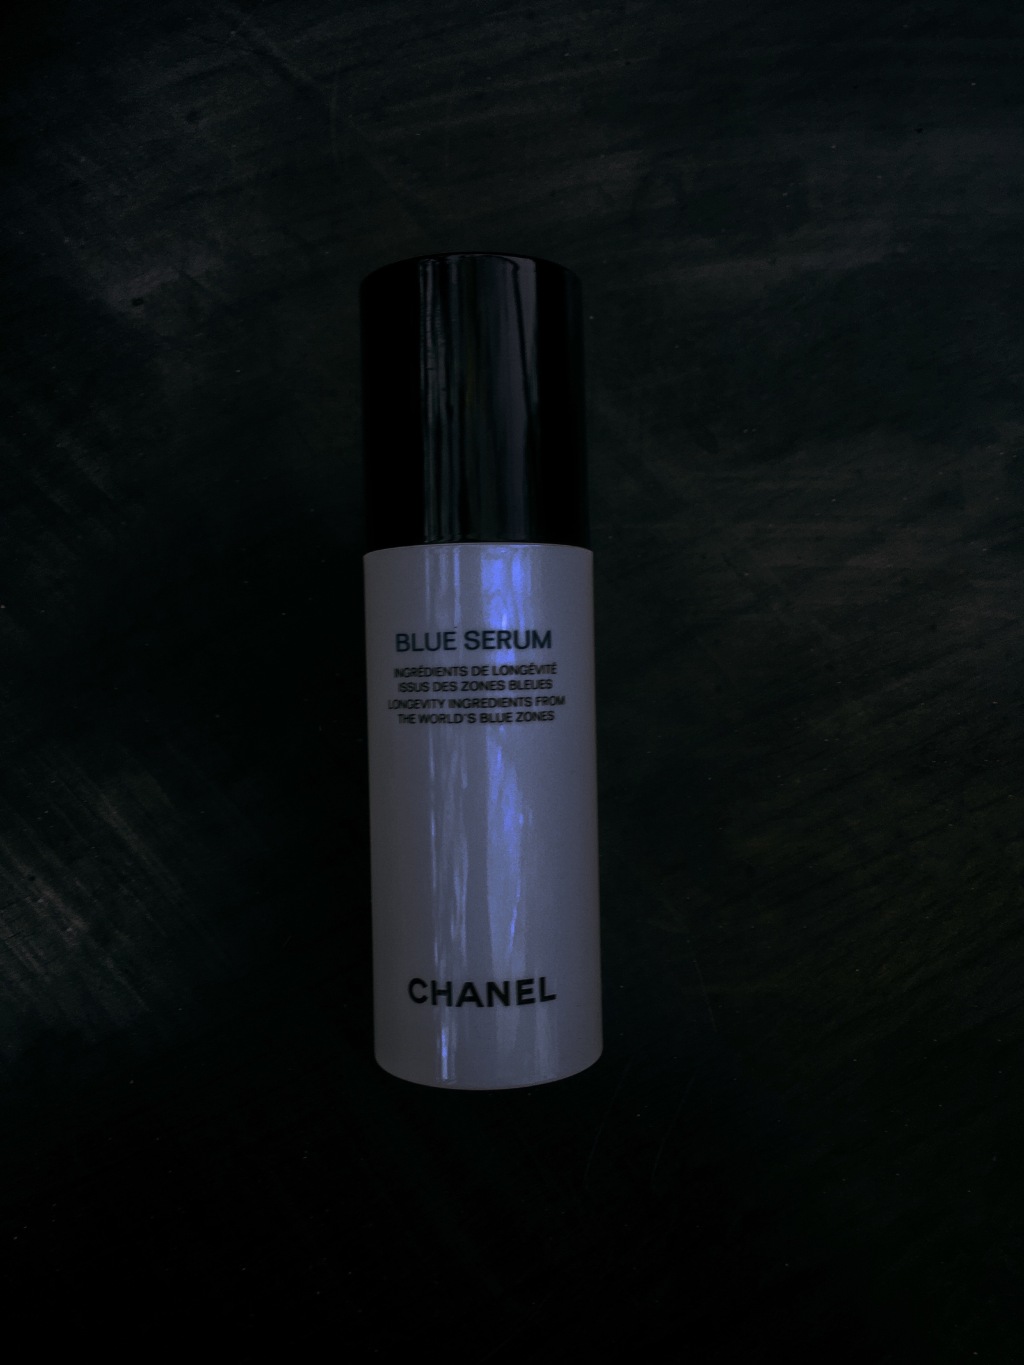 Chanel Blue Serum review